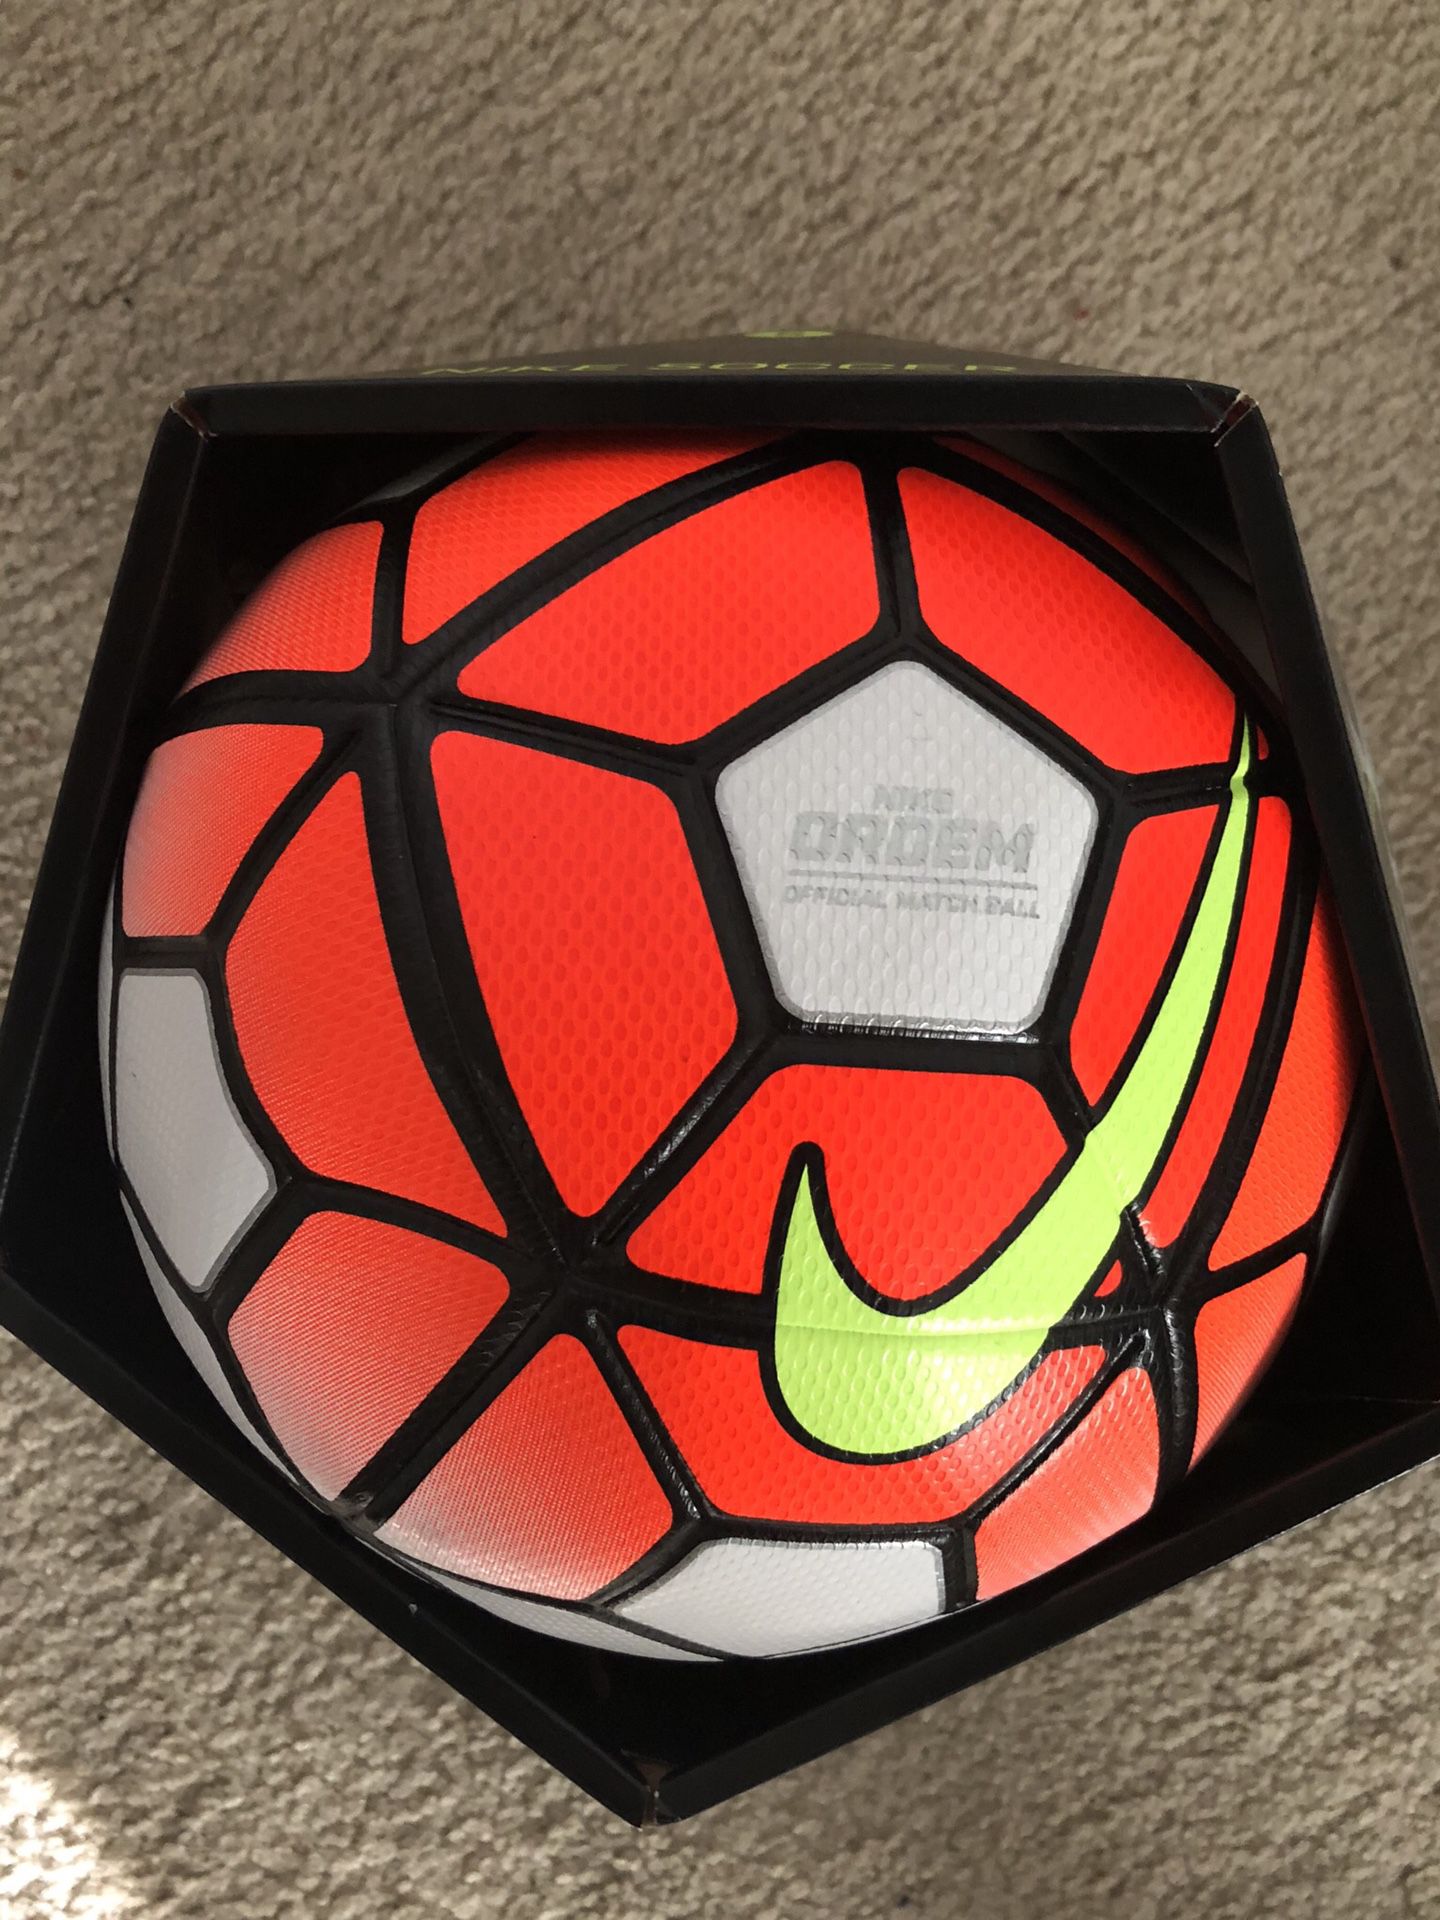 take a picture Hurry up Put together Nike Ordem 3 official match soccer ball for Sale in Orlando, FL - OfferUp